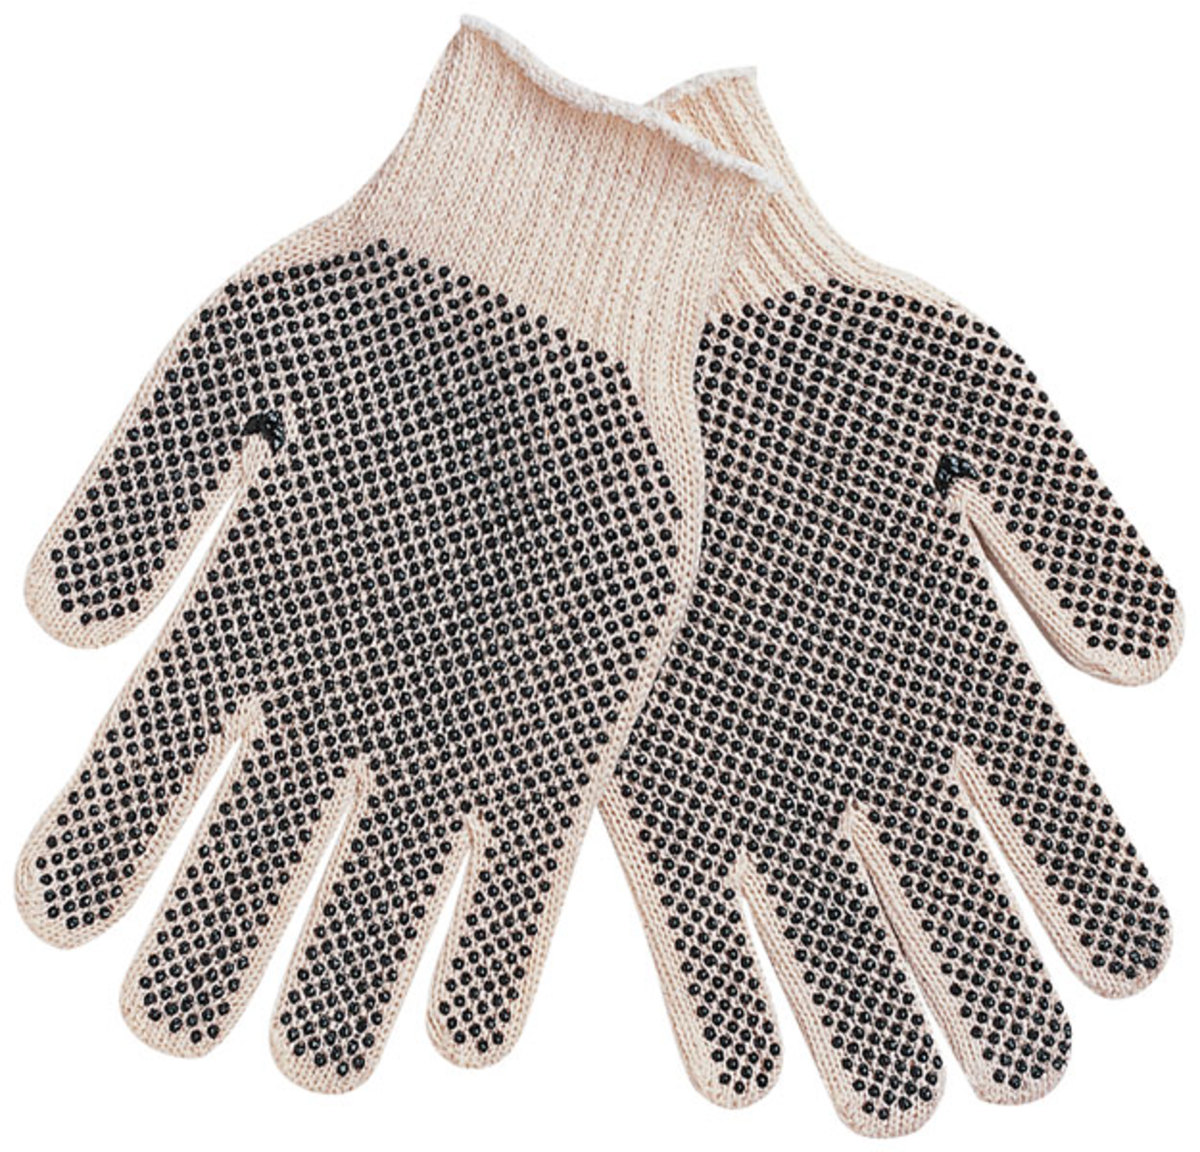 Memphis Glove White And Brown Large 7 Gauge Cotton And Polyester String Knit Work Gloves With Knit Wrist